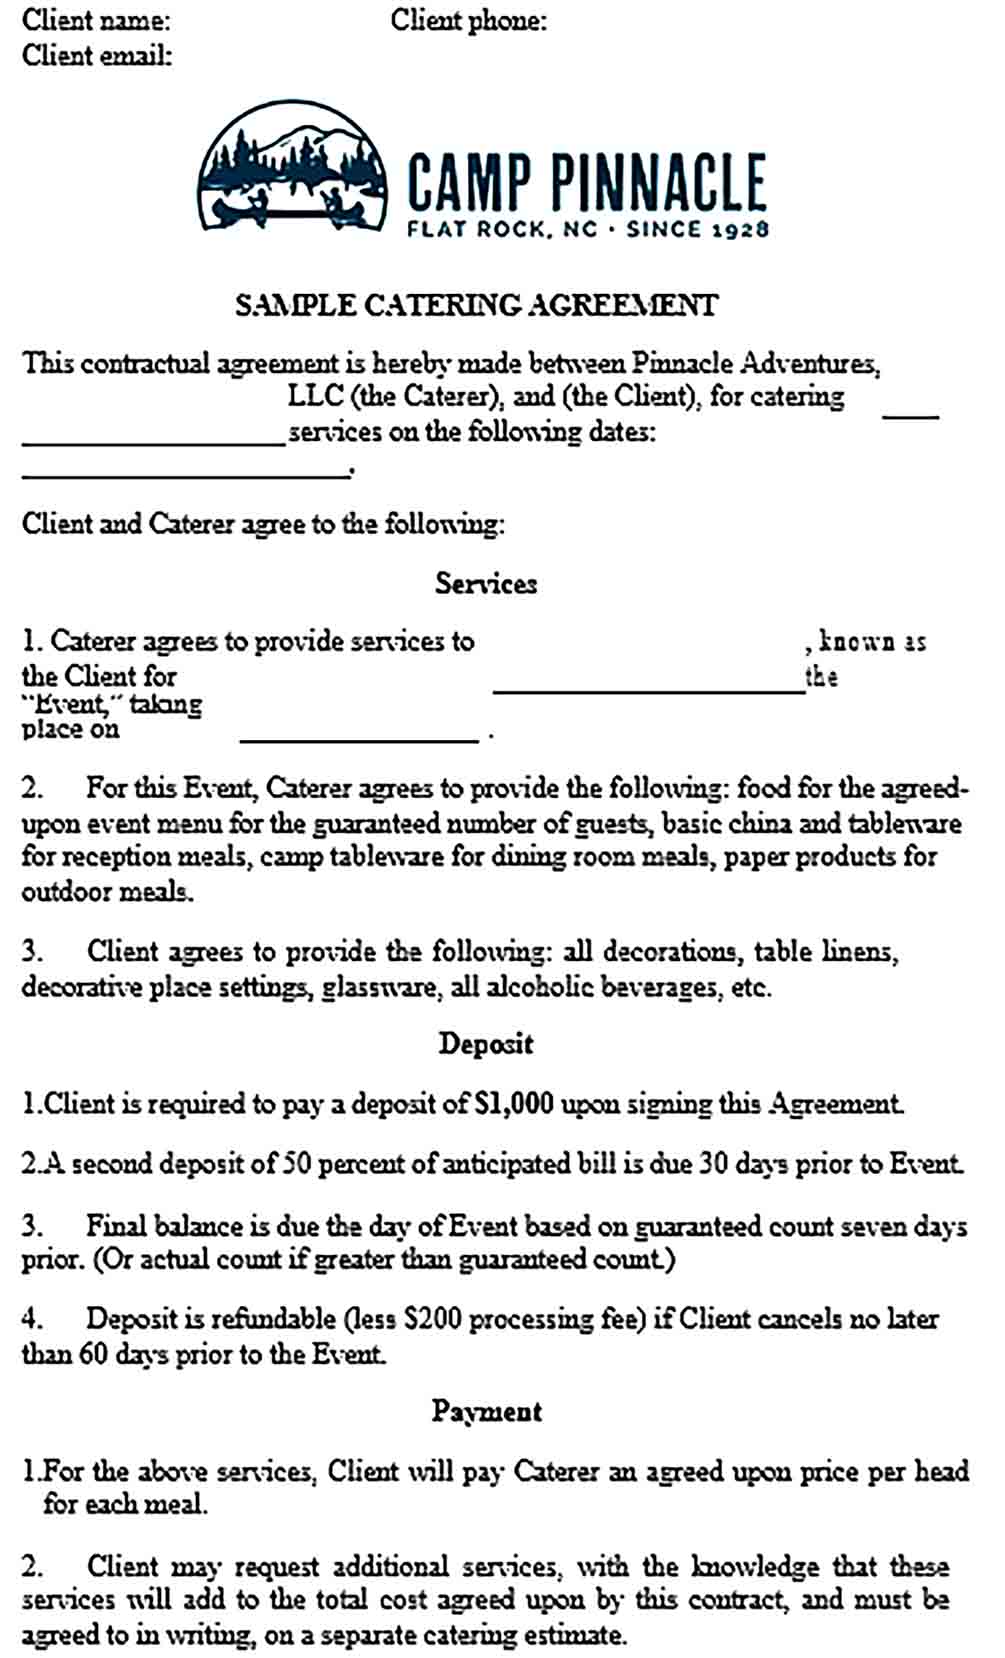 Sample Catering Service Agreement